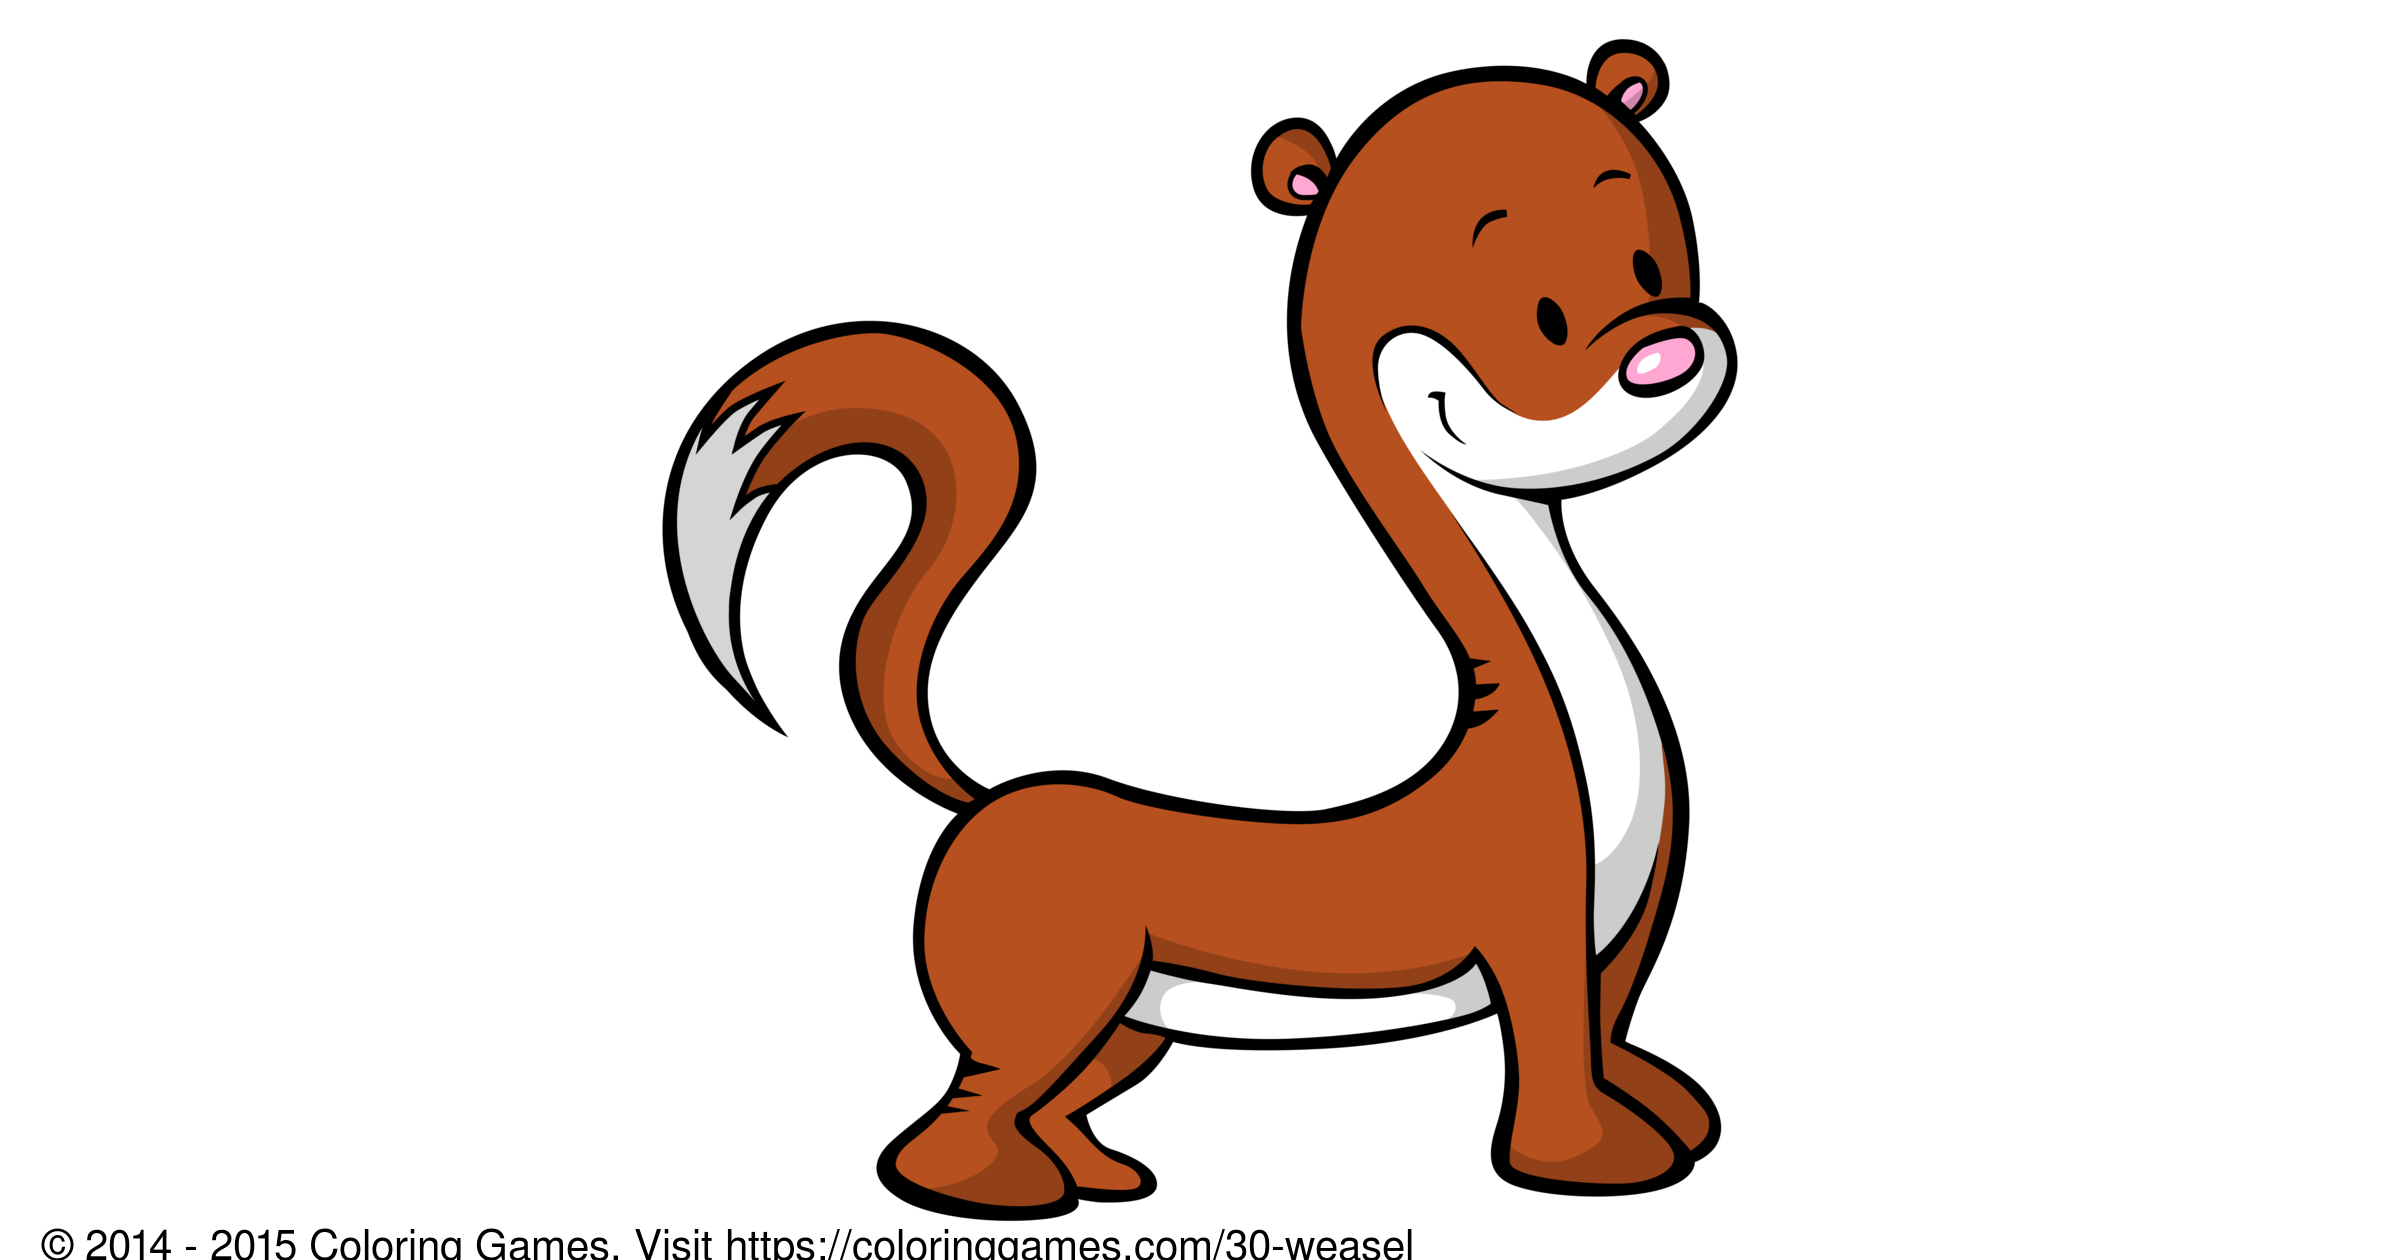 Weasel - Coloring Games and Coloring Pages